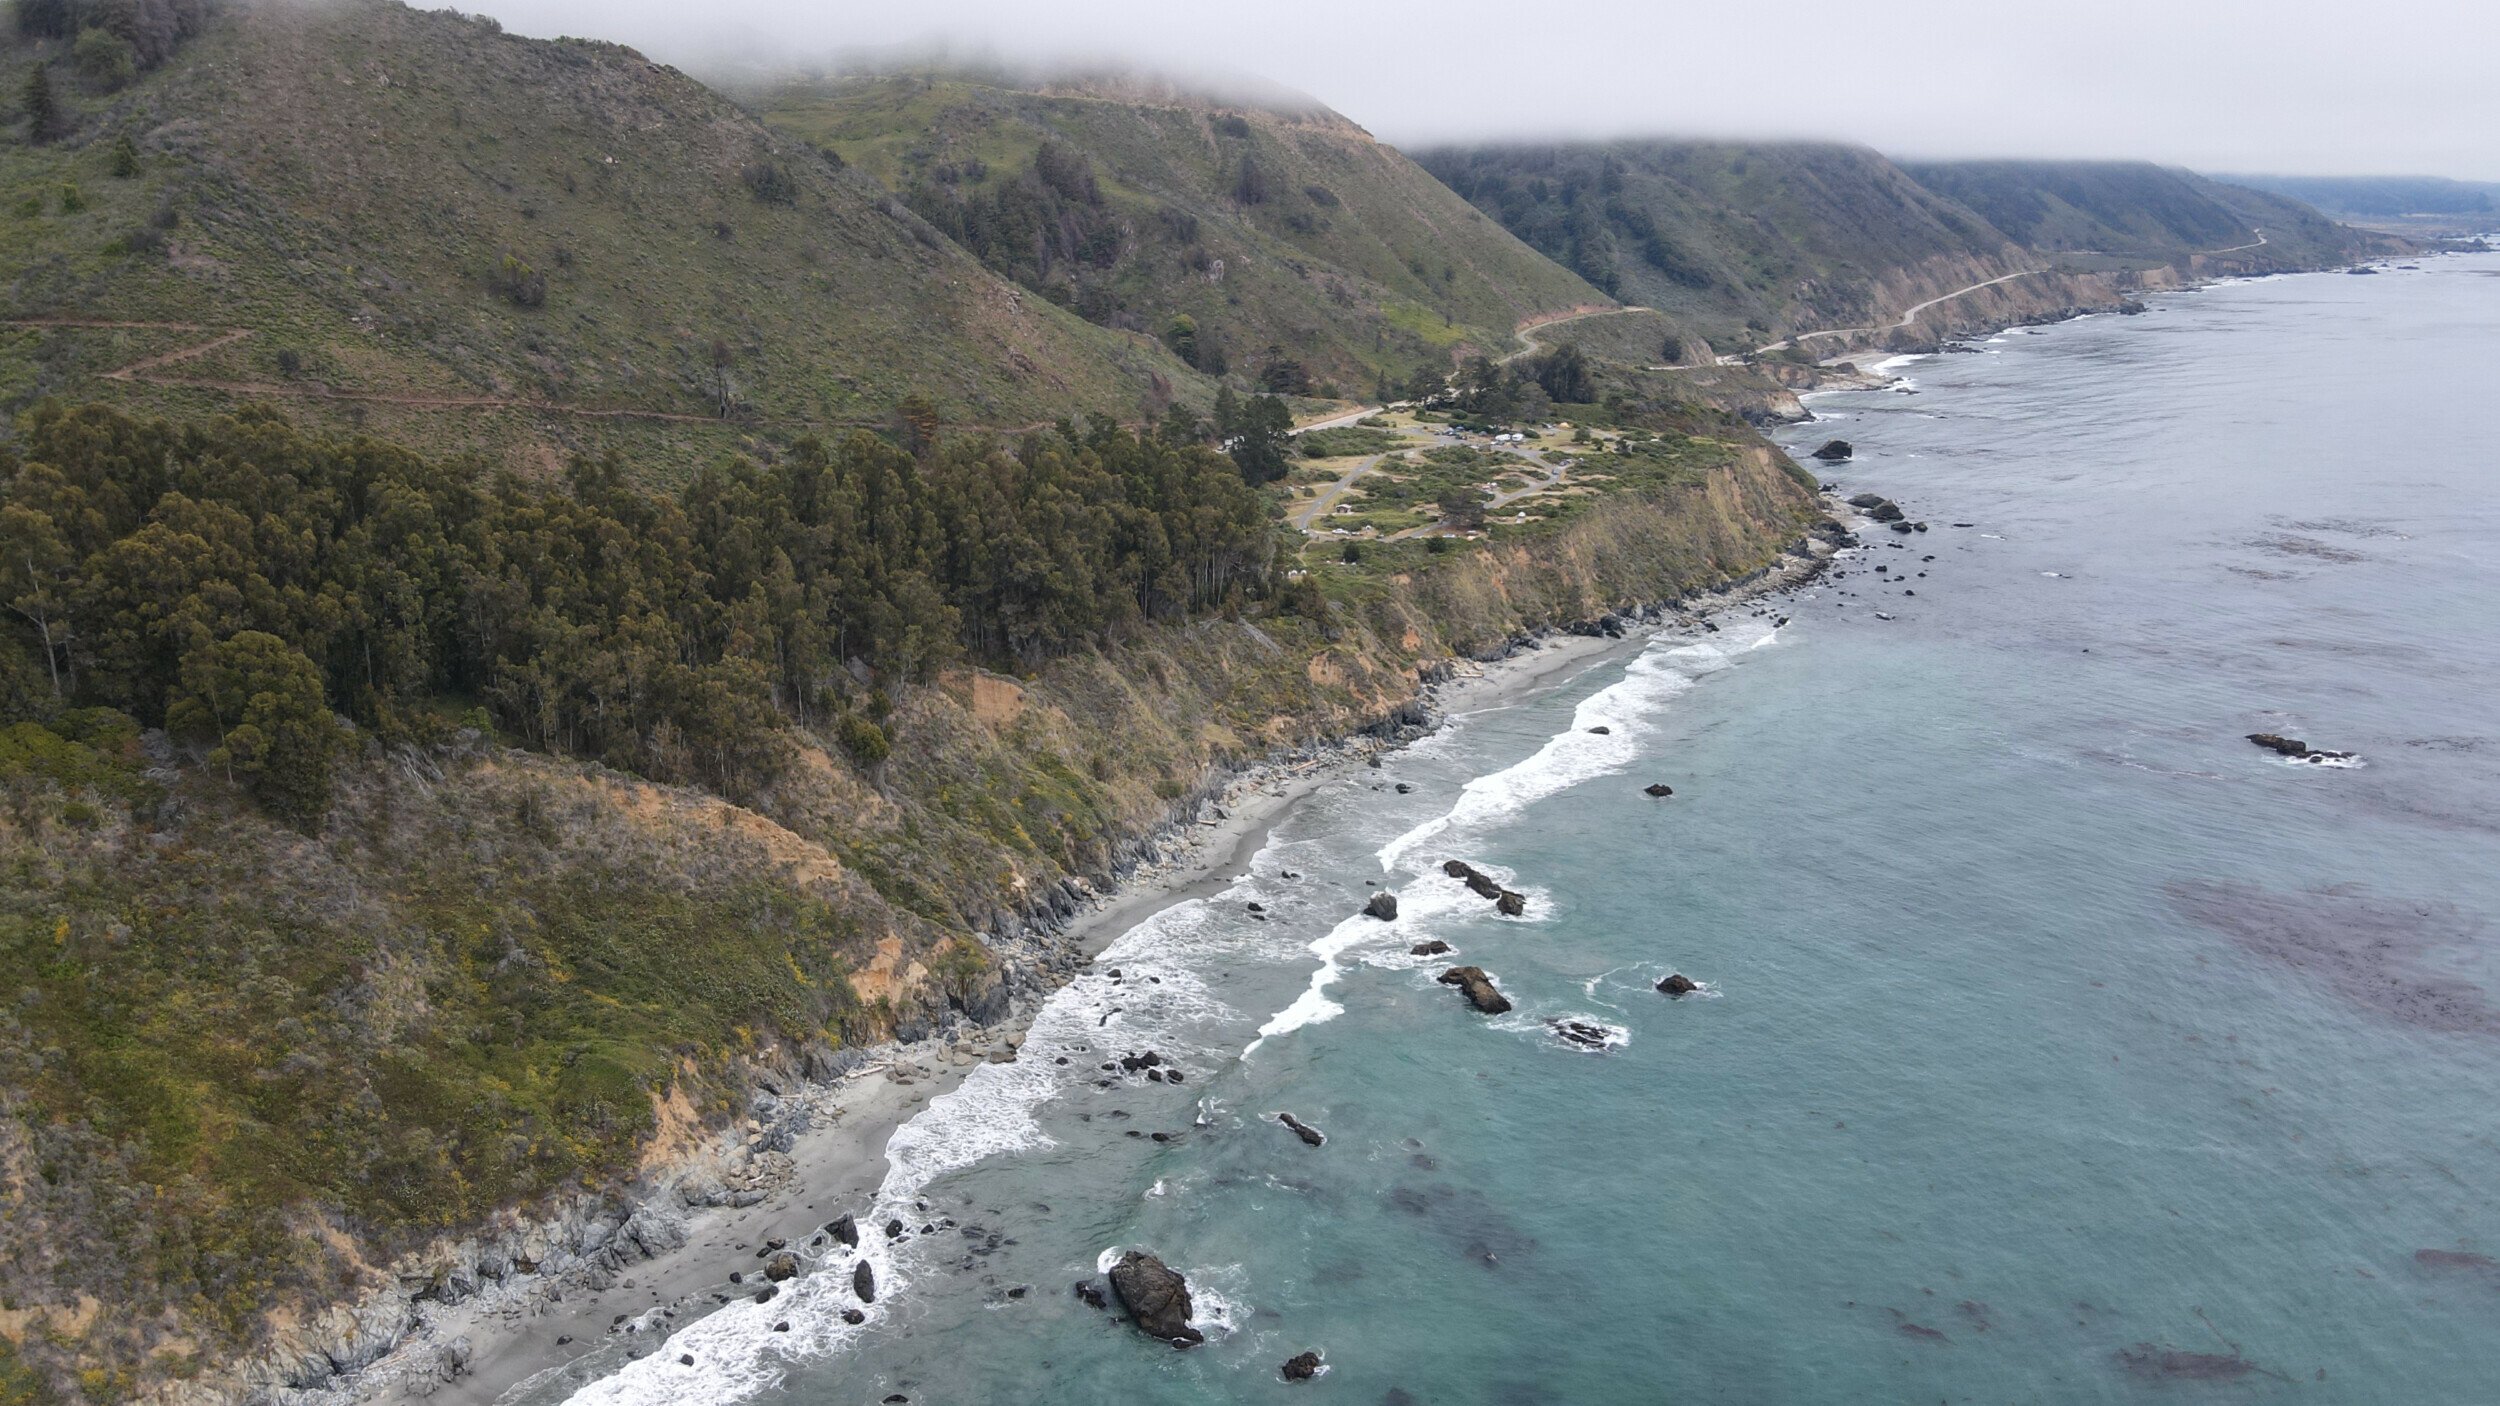 Aerial view of Limekiln State Park in California, showcasing the rugged coastline, dense redwood forests.